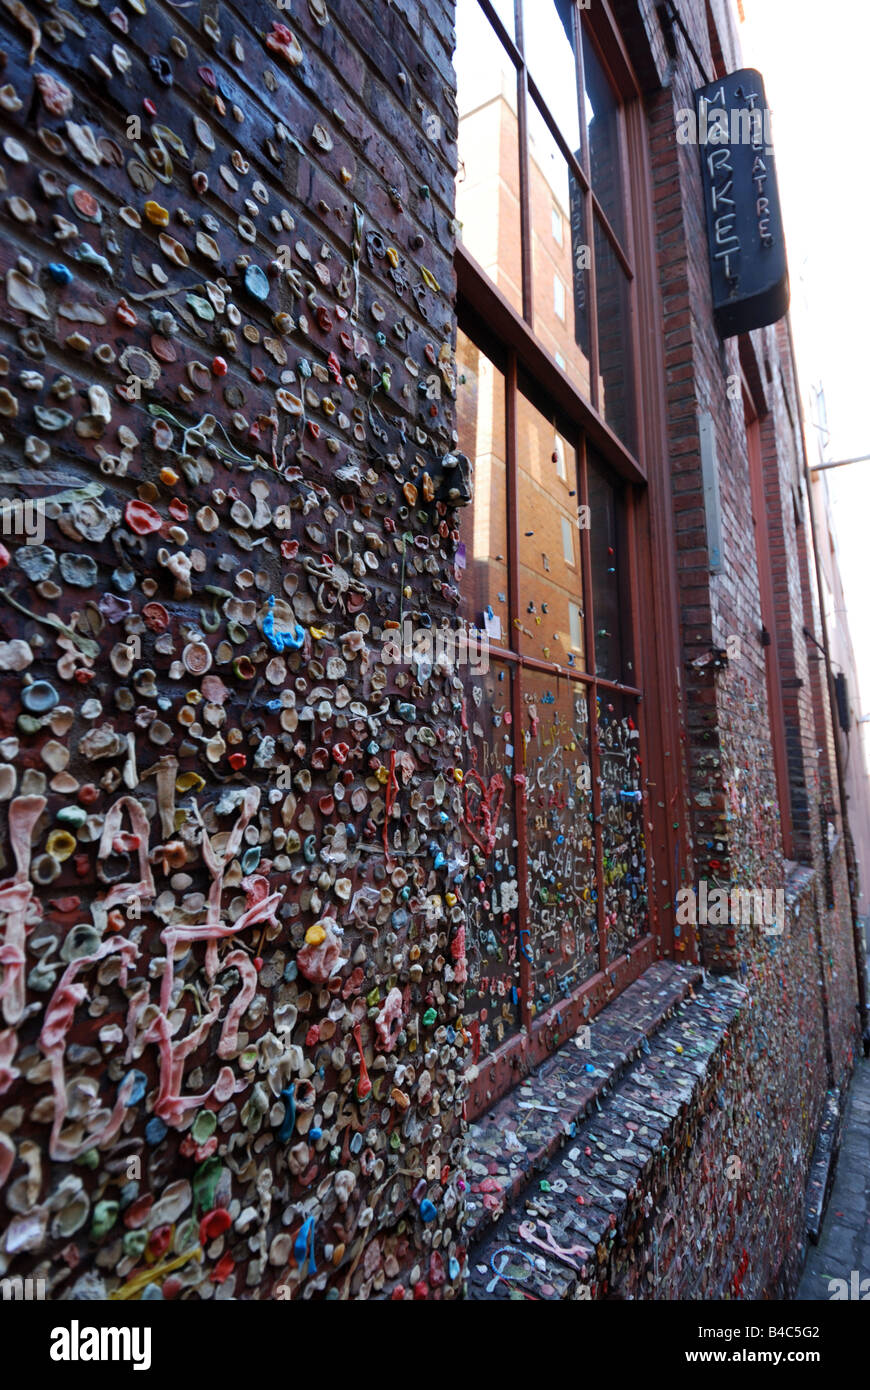 The Gum Wall at Pike Place Market in Seattle, Washington. Stock Photo